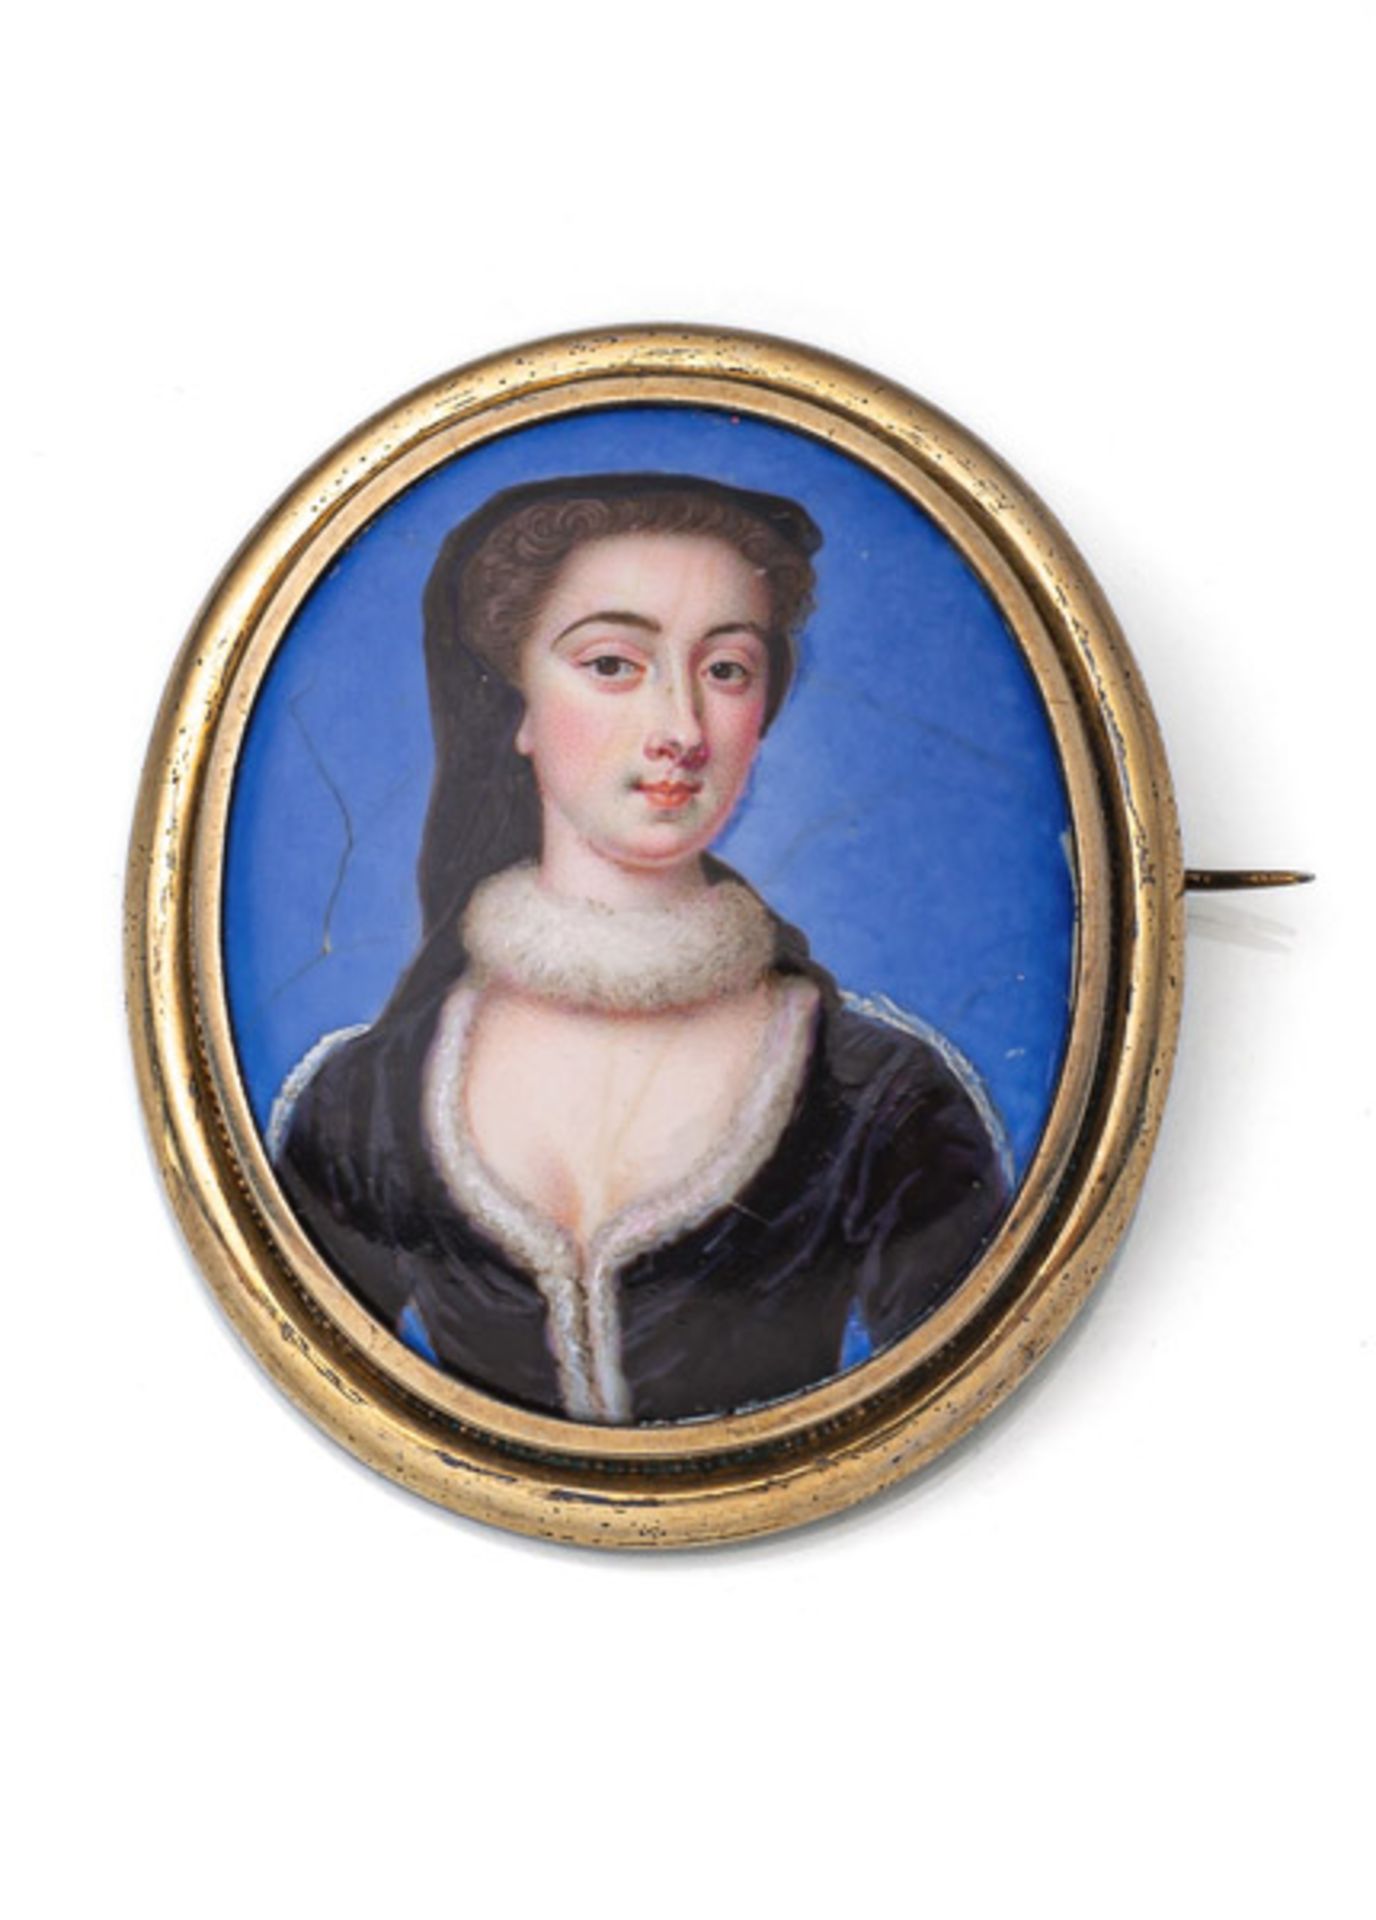 A PORTRAIT MINIATURE OF A LADY IN A BLACK DRESS WITH WHITE FUR